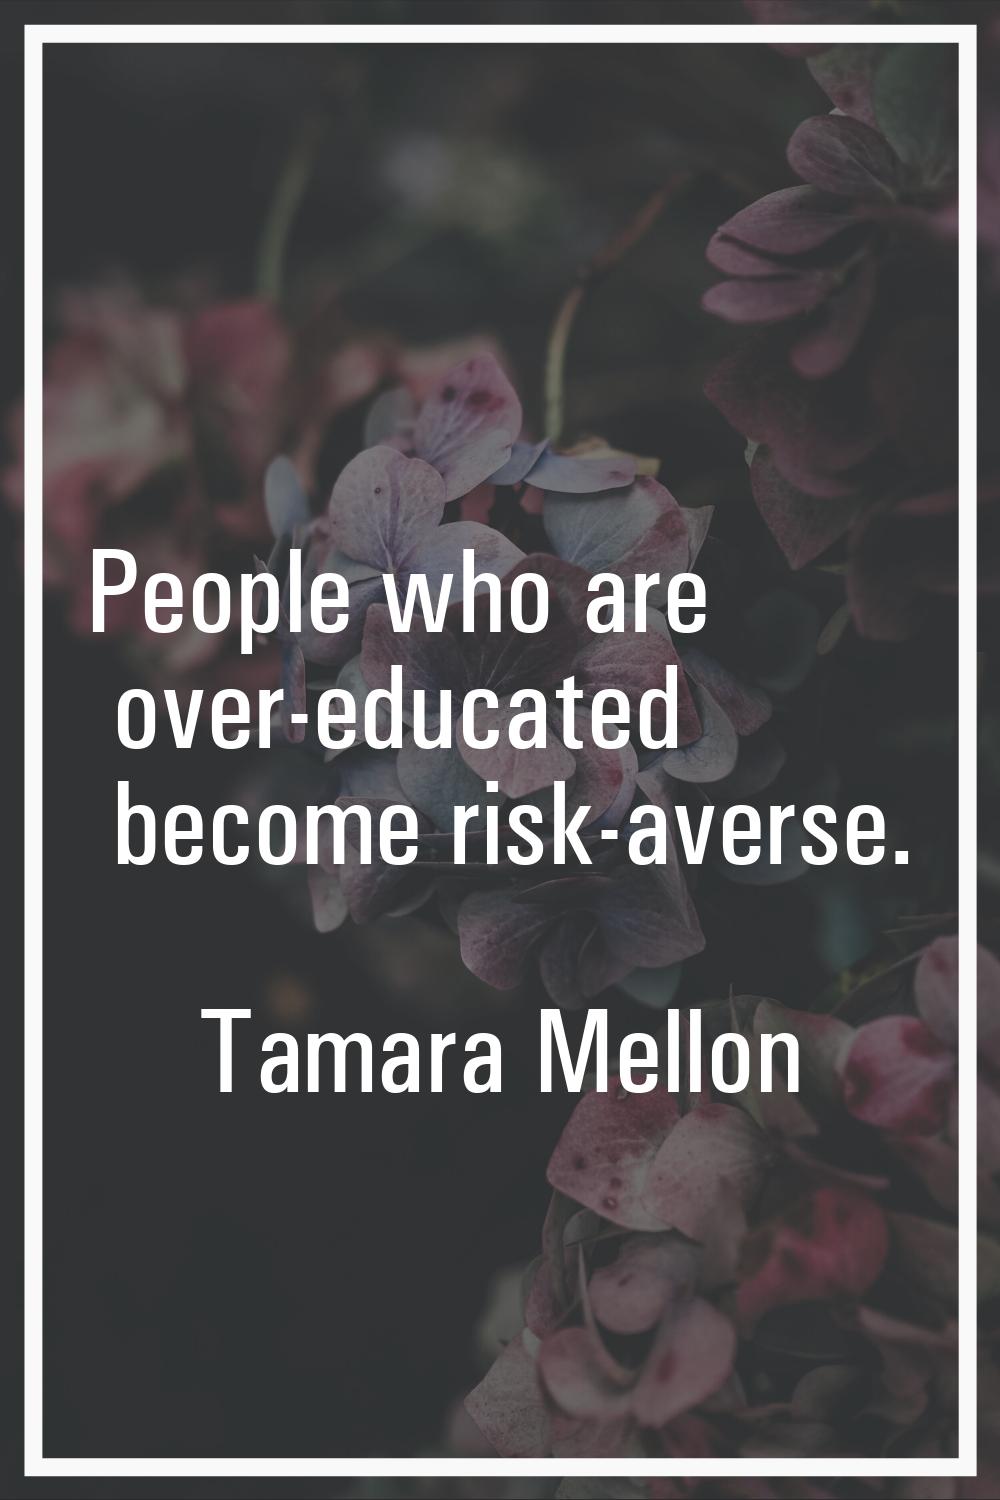 People who are over-educated become risk-averse.